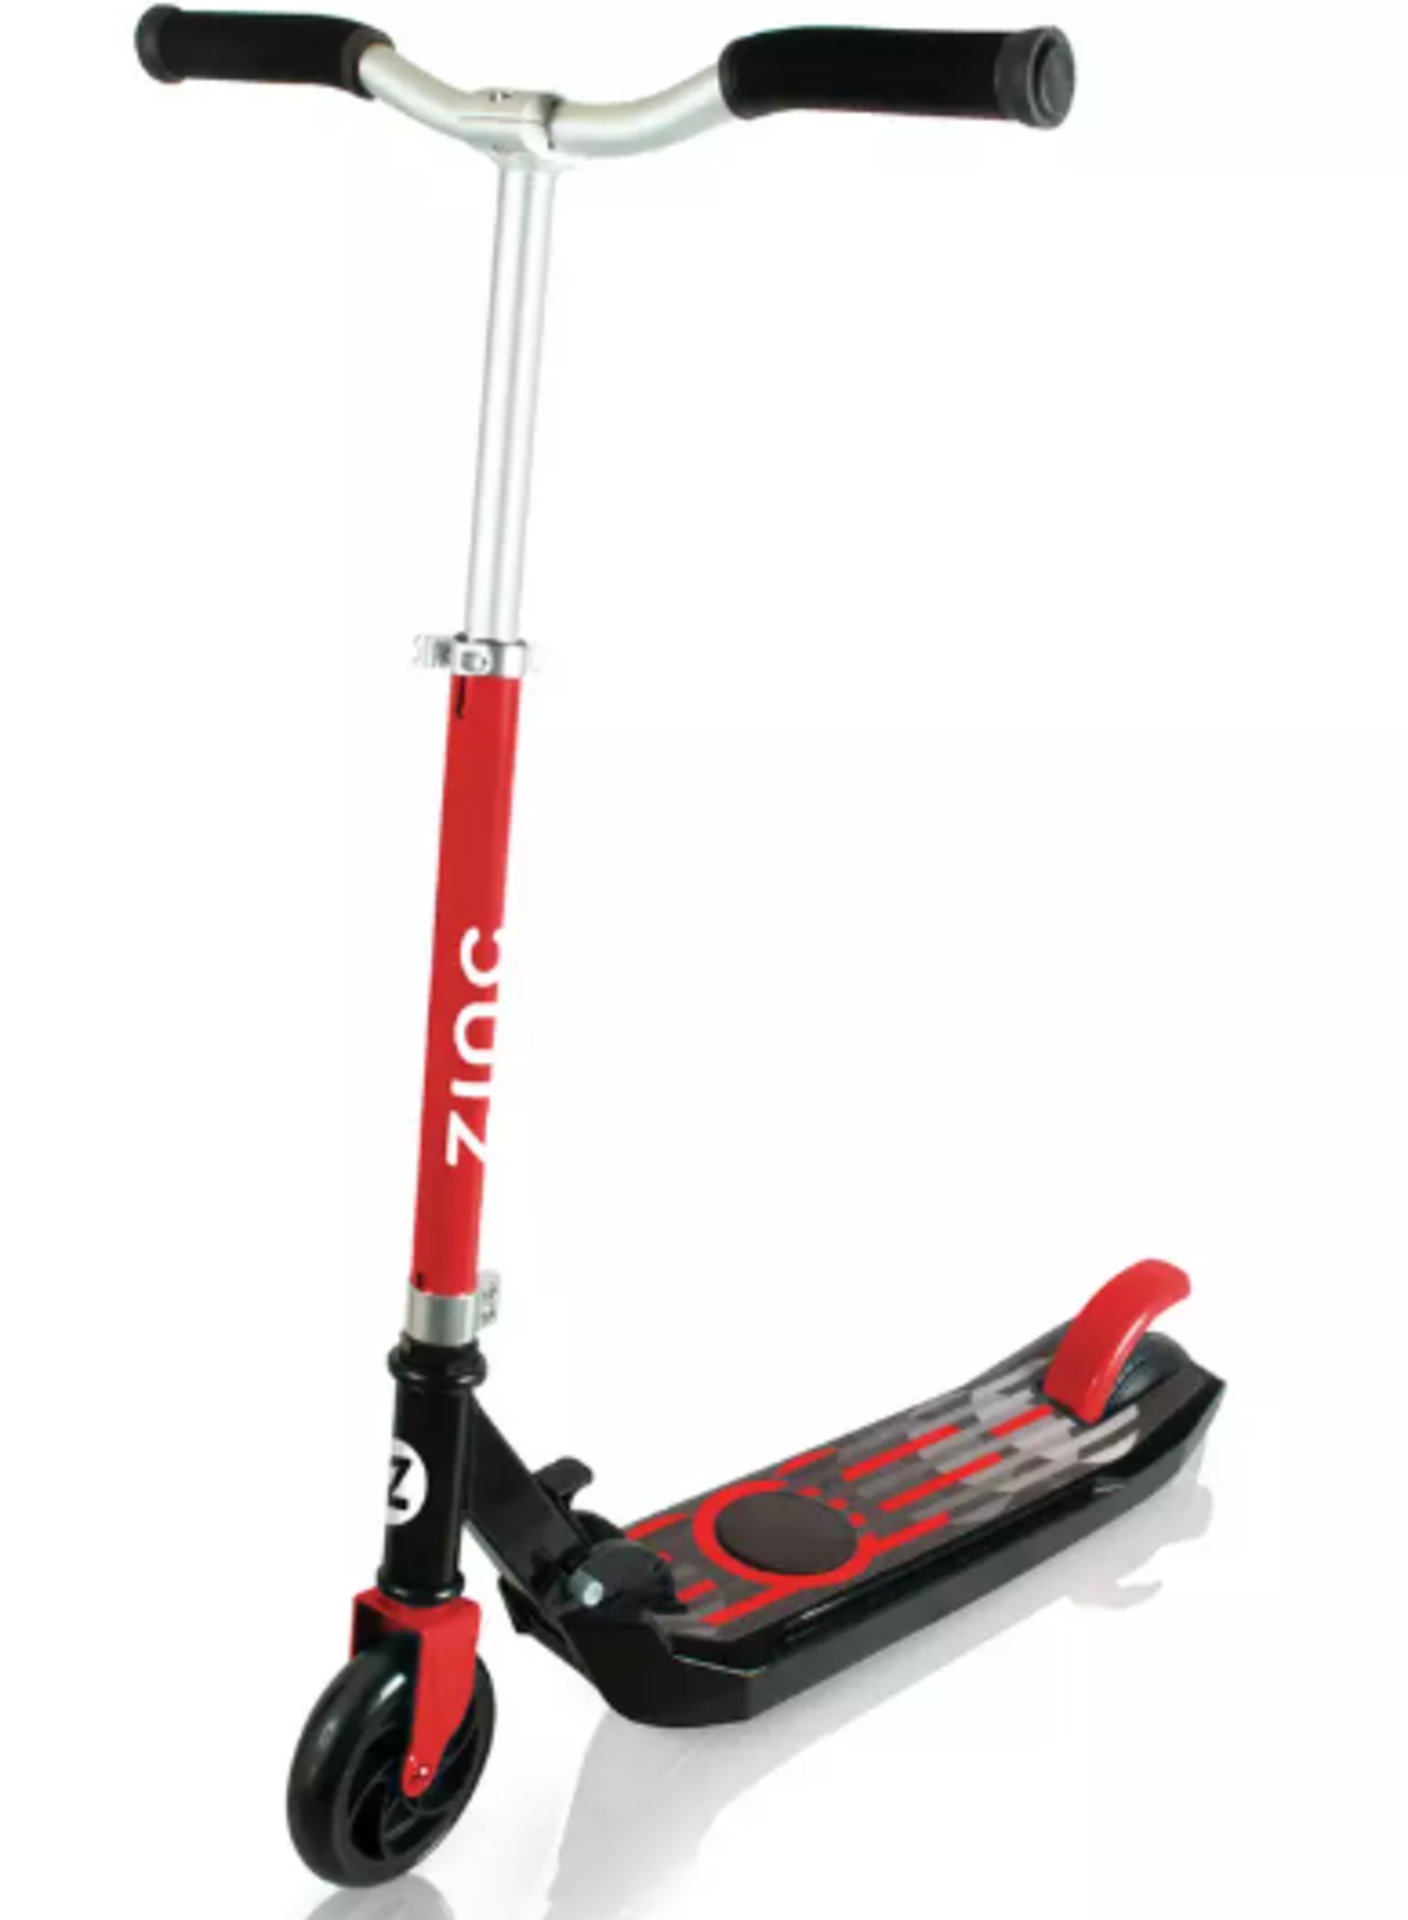 Zinc E4 Max Lithium Electric Scooter. RRP £155.00. The Zinc Folding Electric E4 Max scooter is ideal